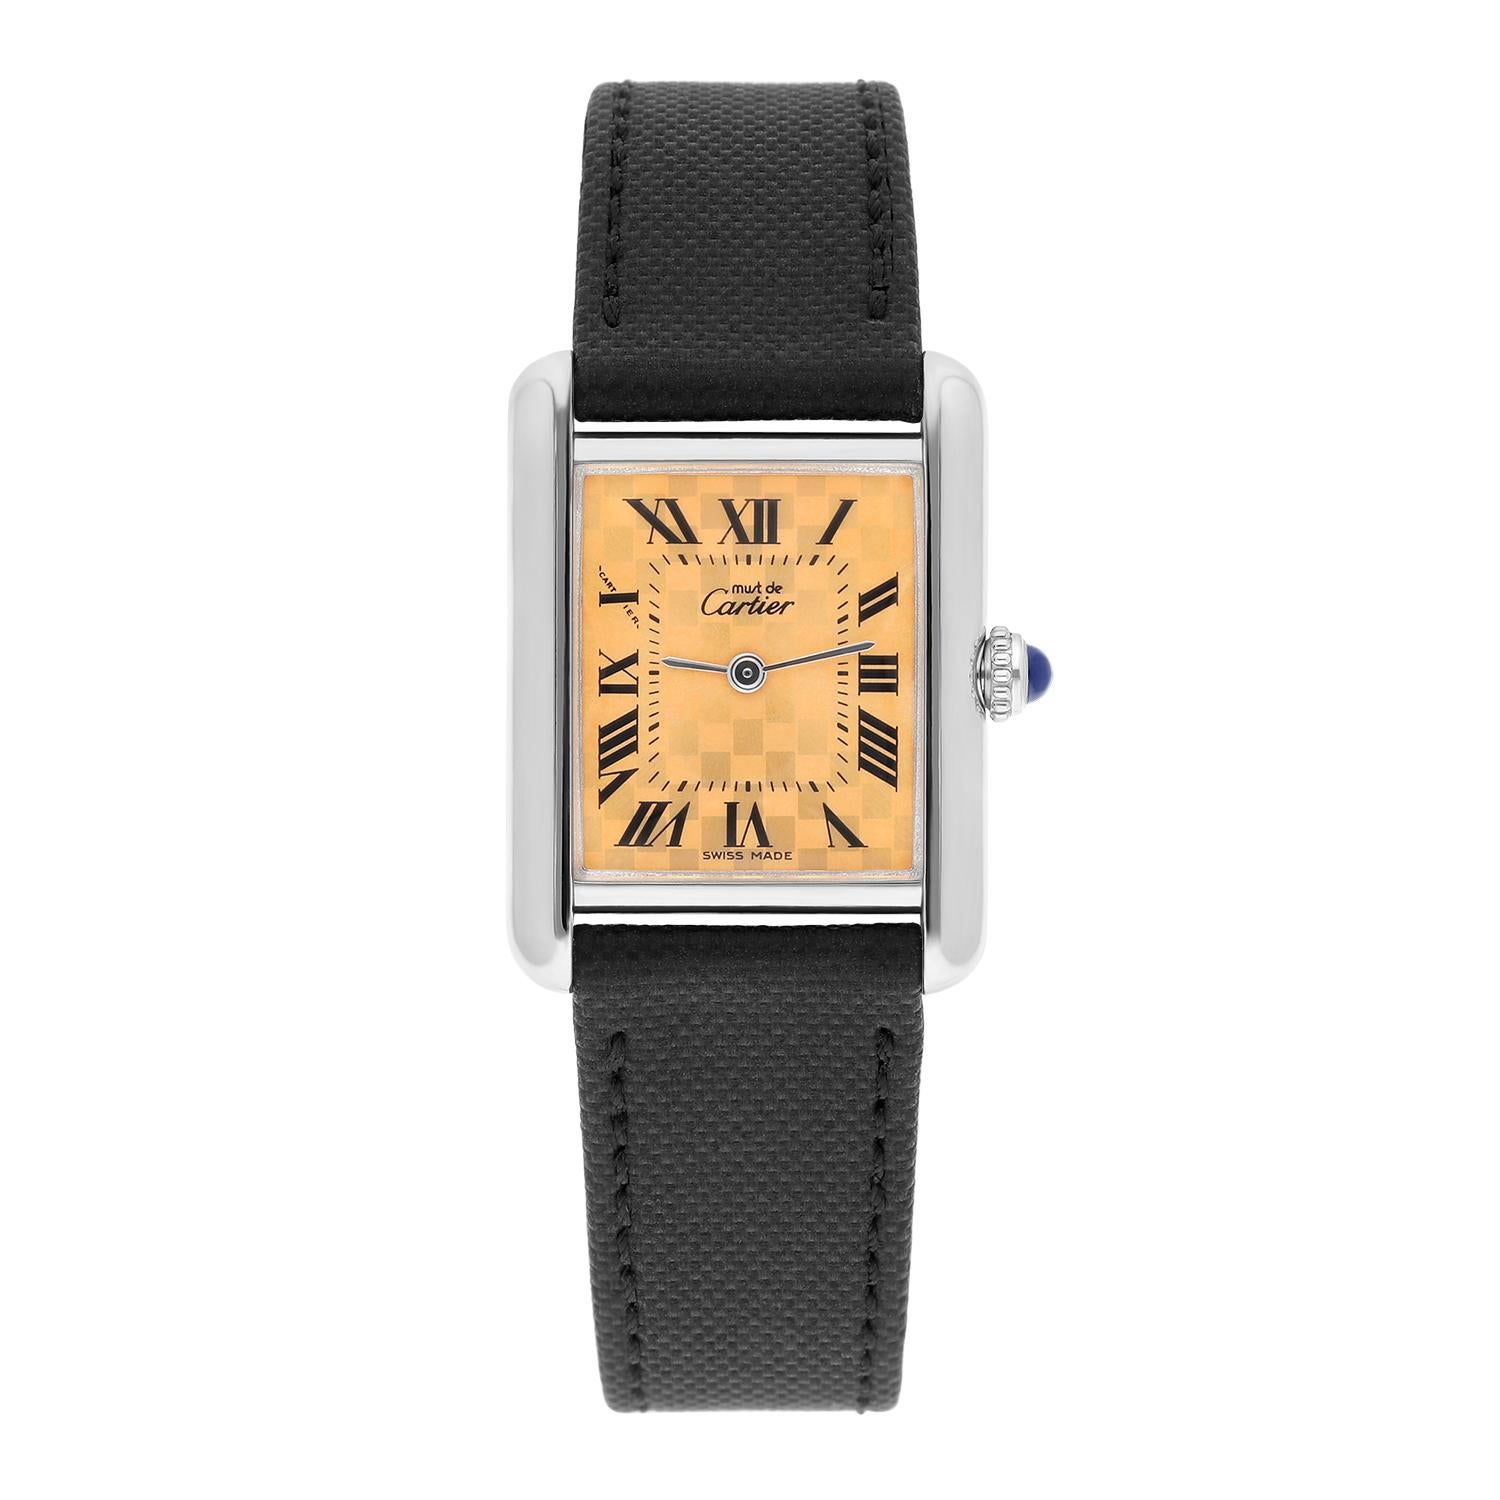 This exquisite Cartier Must de Cartier Tank wristwatch is a timeless classic that boasts a stunning design. Crafted in Switzerland, it features a 22x30mm sterling silver case with a silver bezel and a Orange dial with Roman numerals. The watch is